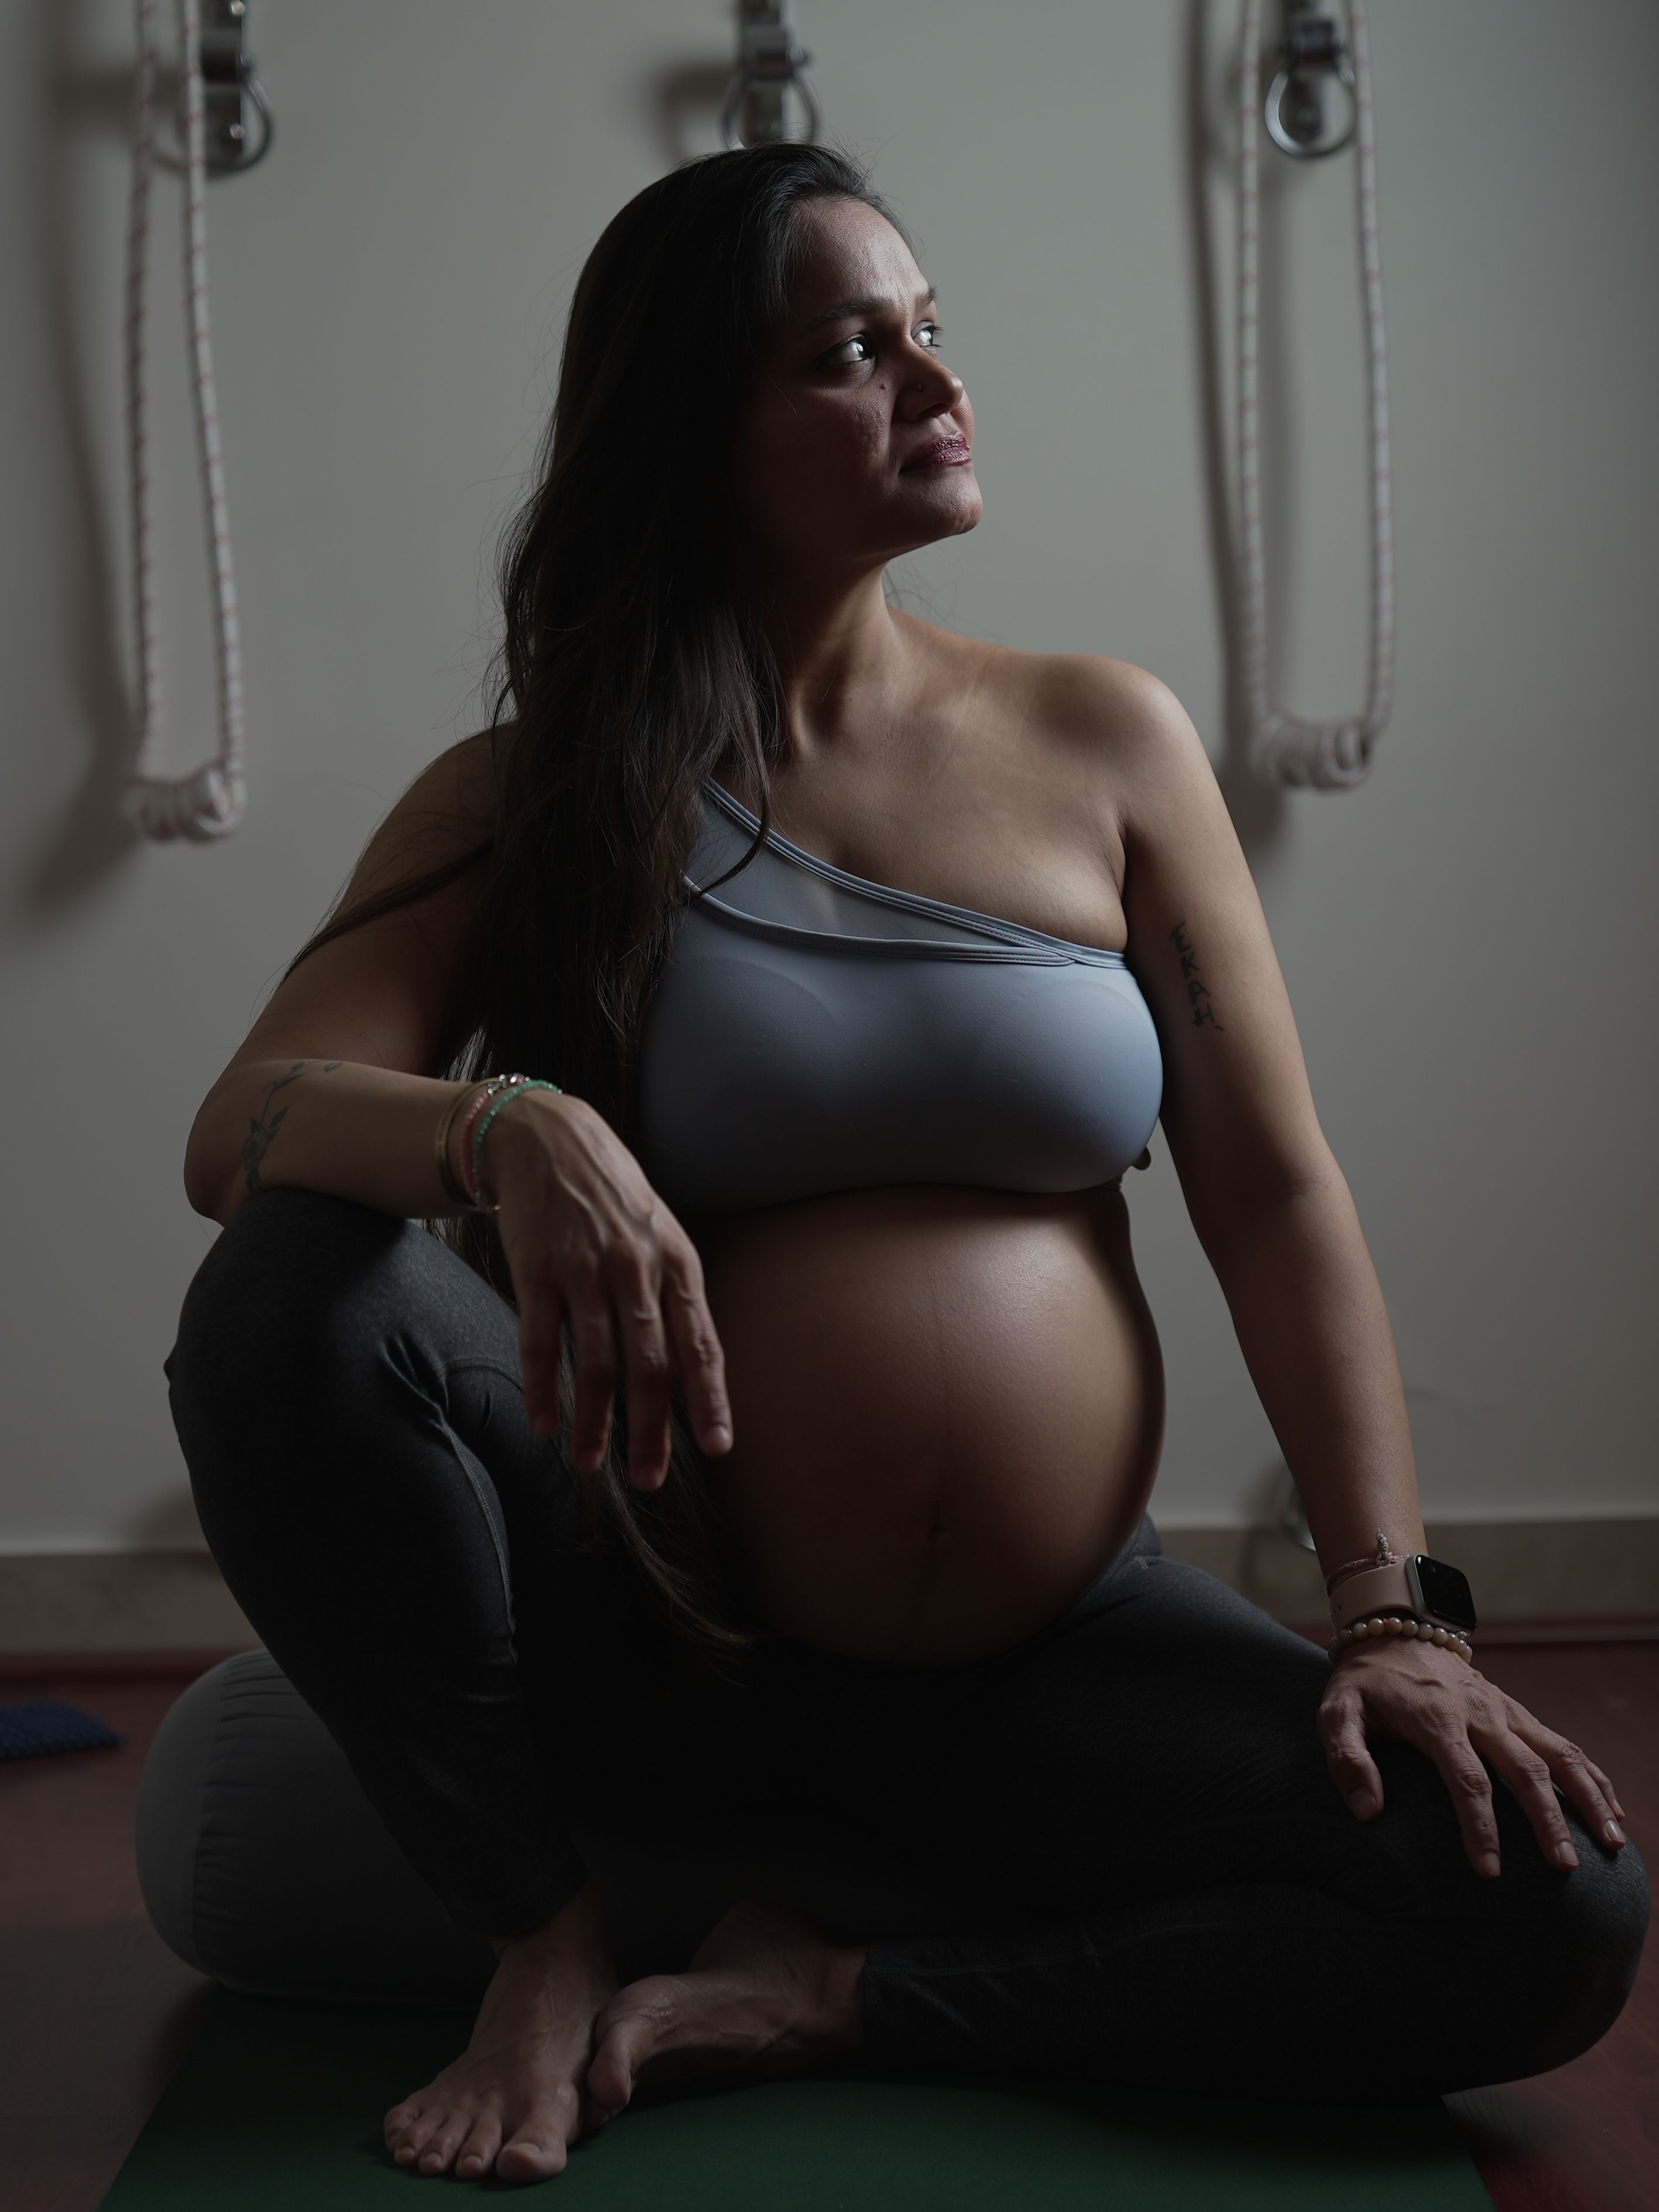 A photo shoot I did to document my prenatal fitness.